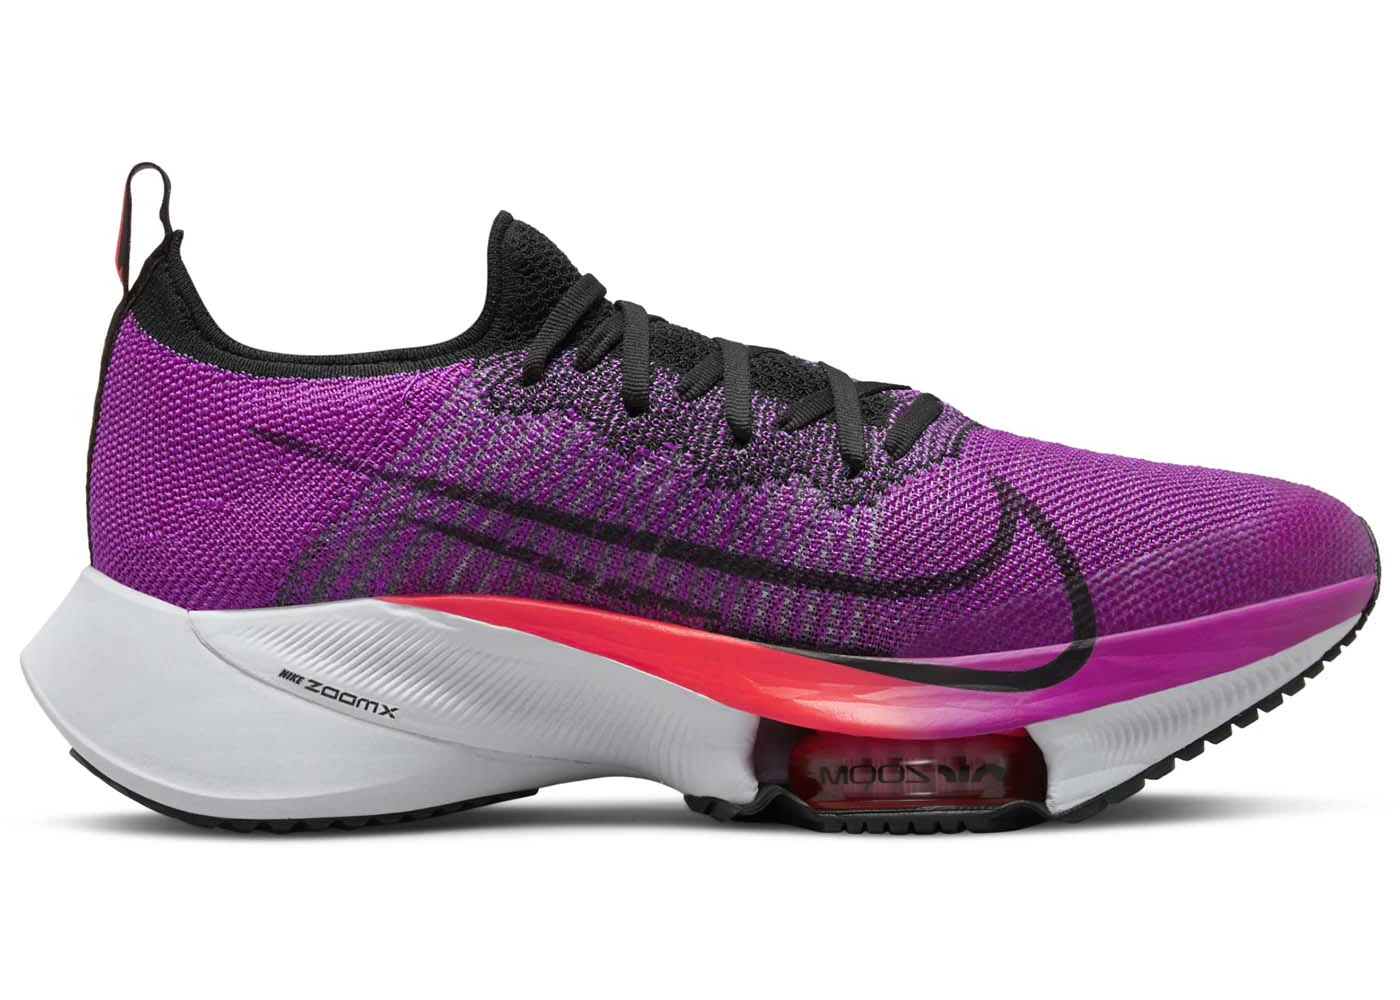 Nike Air Zoom Tempo Next% Flyknit Hyper Violet (Women's) - CI9924-501 - US